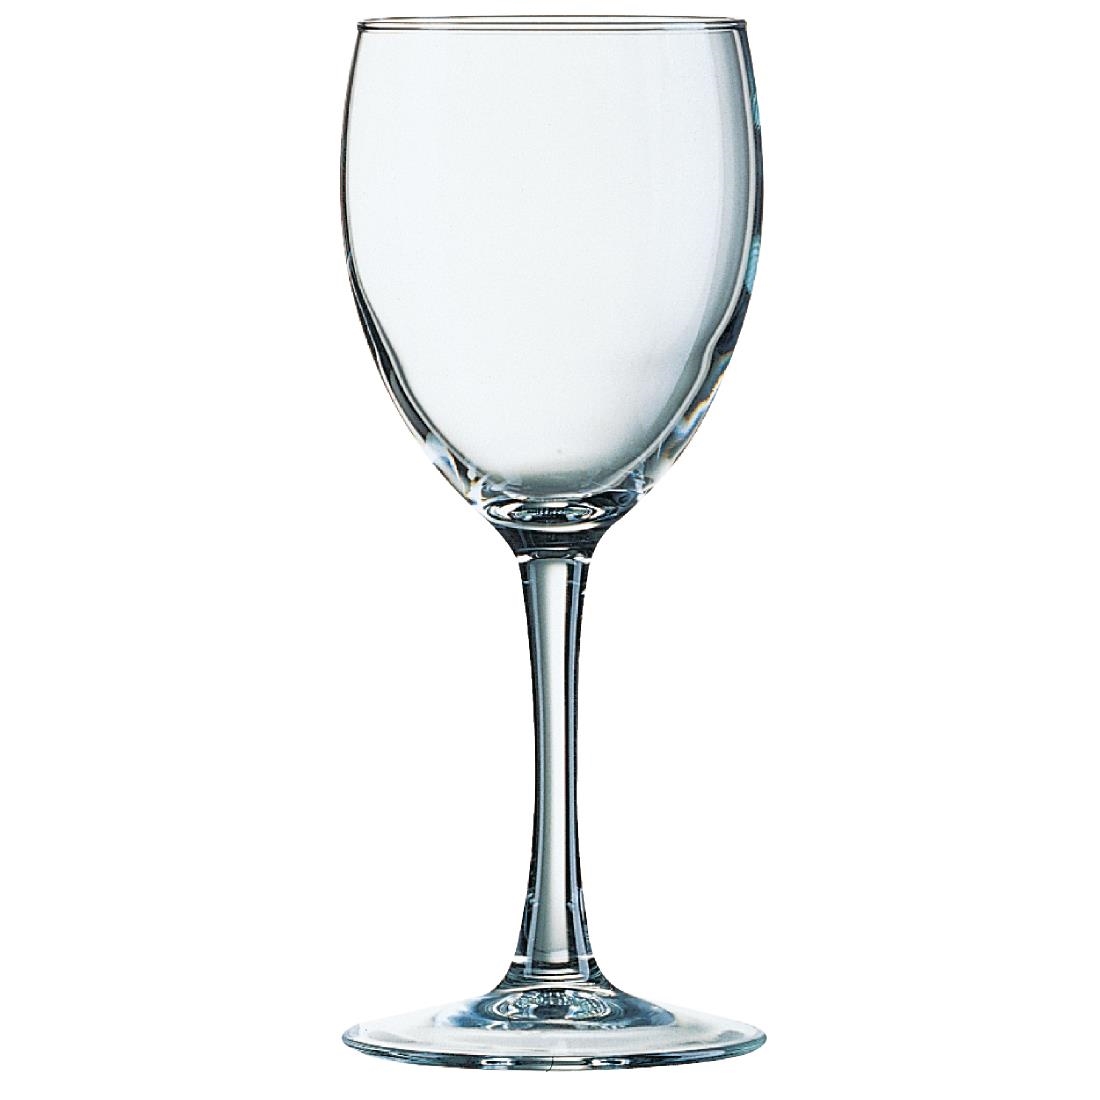 Arcoroc Princesa Wine Glasses 310ml CE Marked at 250ml (Pack of 48)